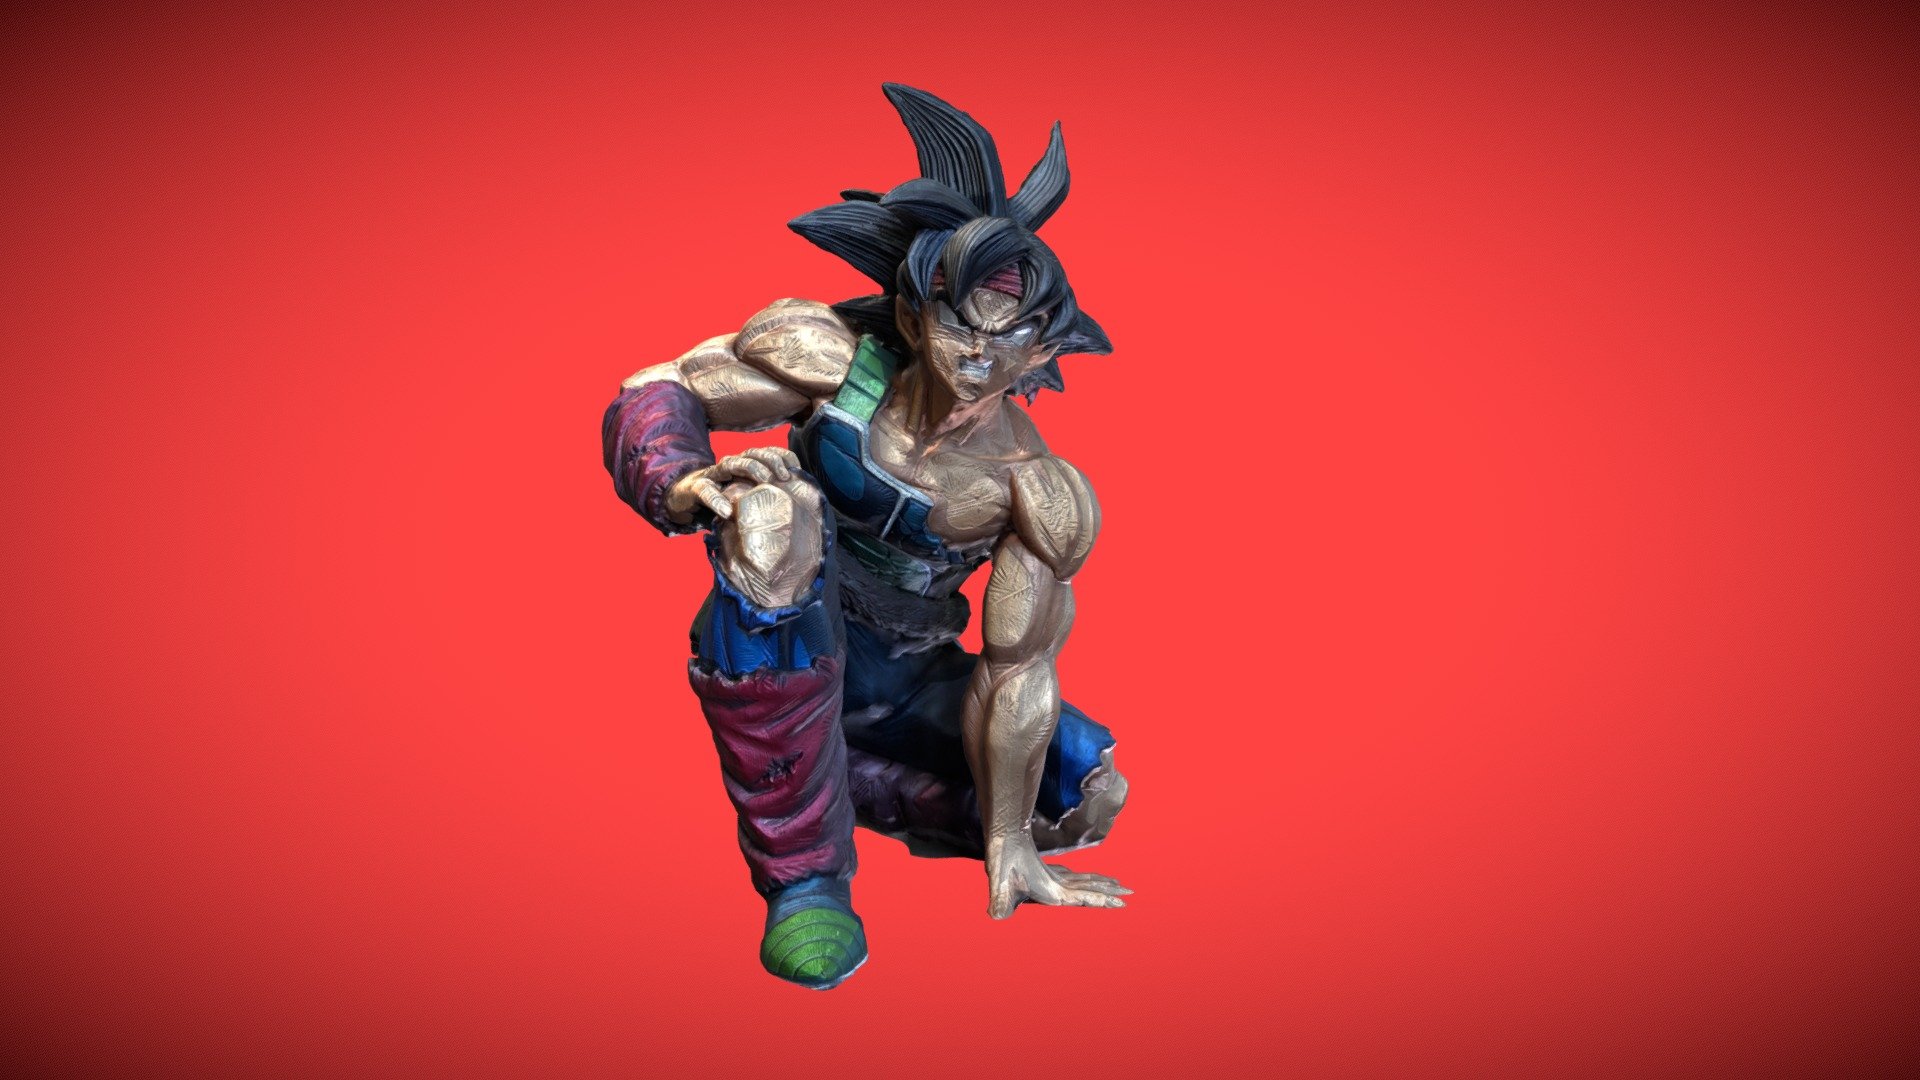 3D model of Bardock, emblematic character of the Dragon Ball universe.
You will find the following files :


FBX
textures included

Please enjoy ! - Bardock 3D model - 3D model by Asahikira 3d model